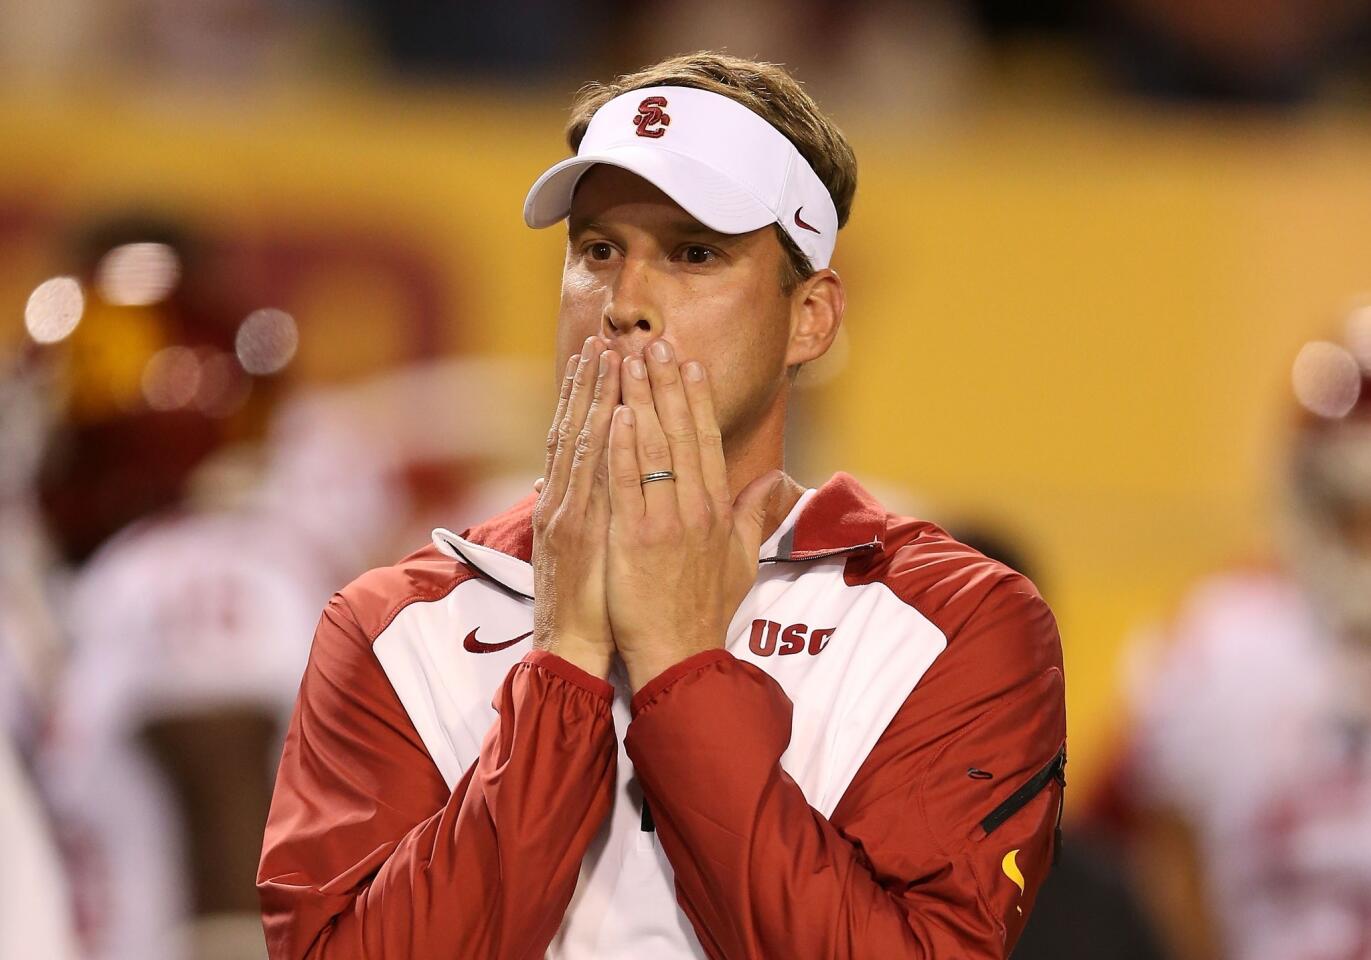 USC Coach Lane Kiffin had little to offer the Trojans during a 62-41 loss to Arizona State on Saturday night at Sun Devil Stadium in Tempe, Ariz. USC fired Kiffin early Sunday morning after the team had returned to Los Angeles.